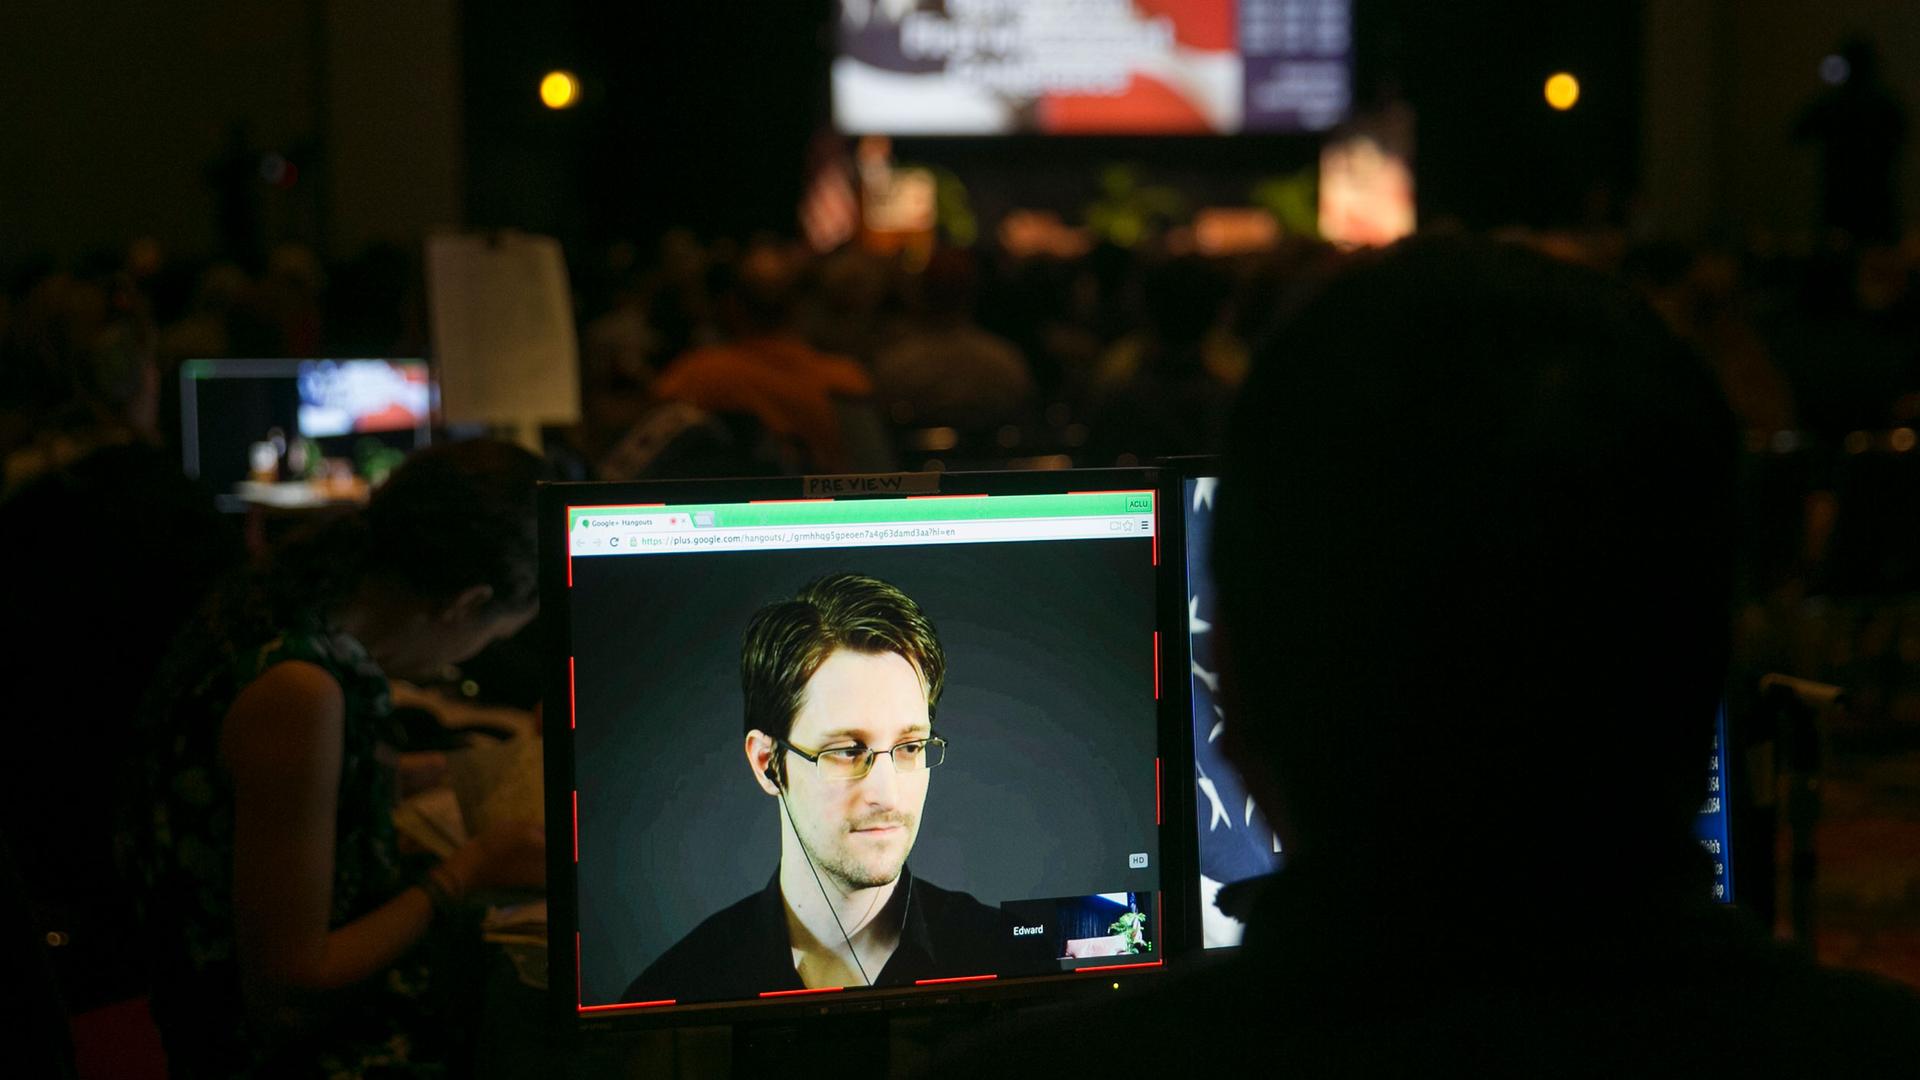 A small computer screen is shown in a dark room with Edward Snowden appearing in a close-up frame.